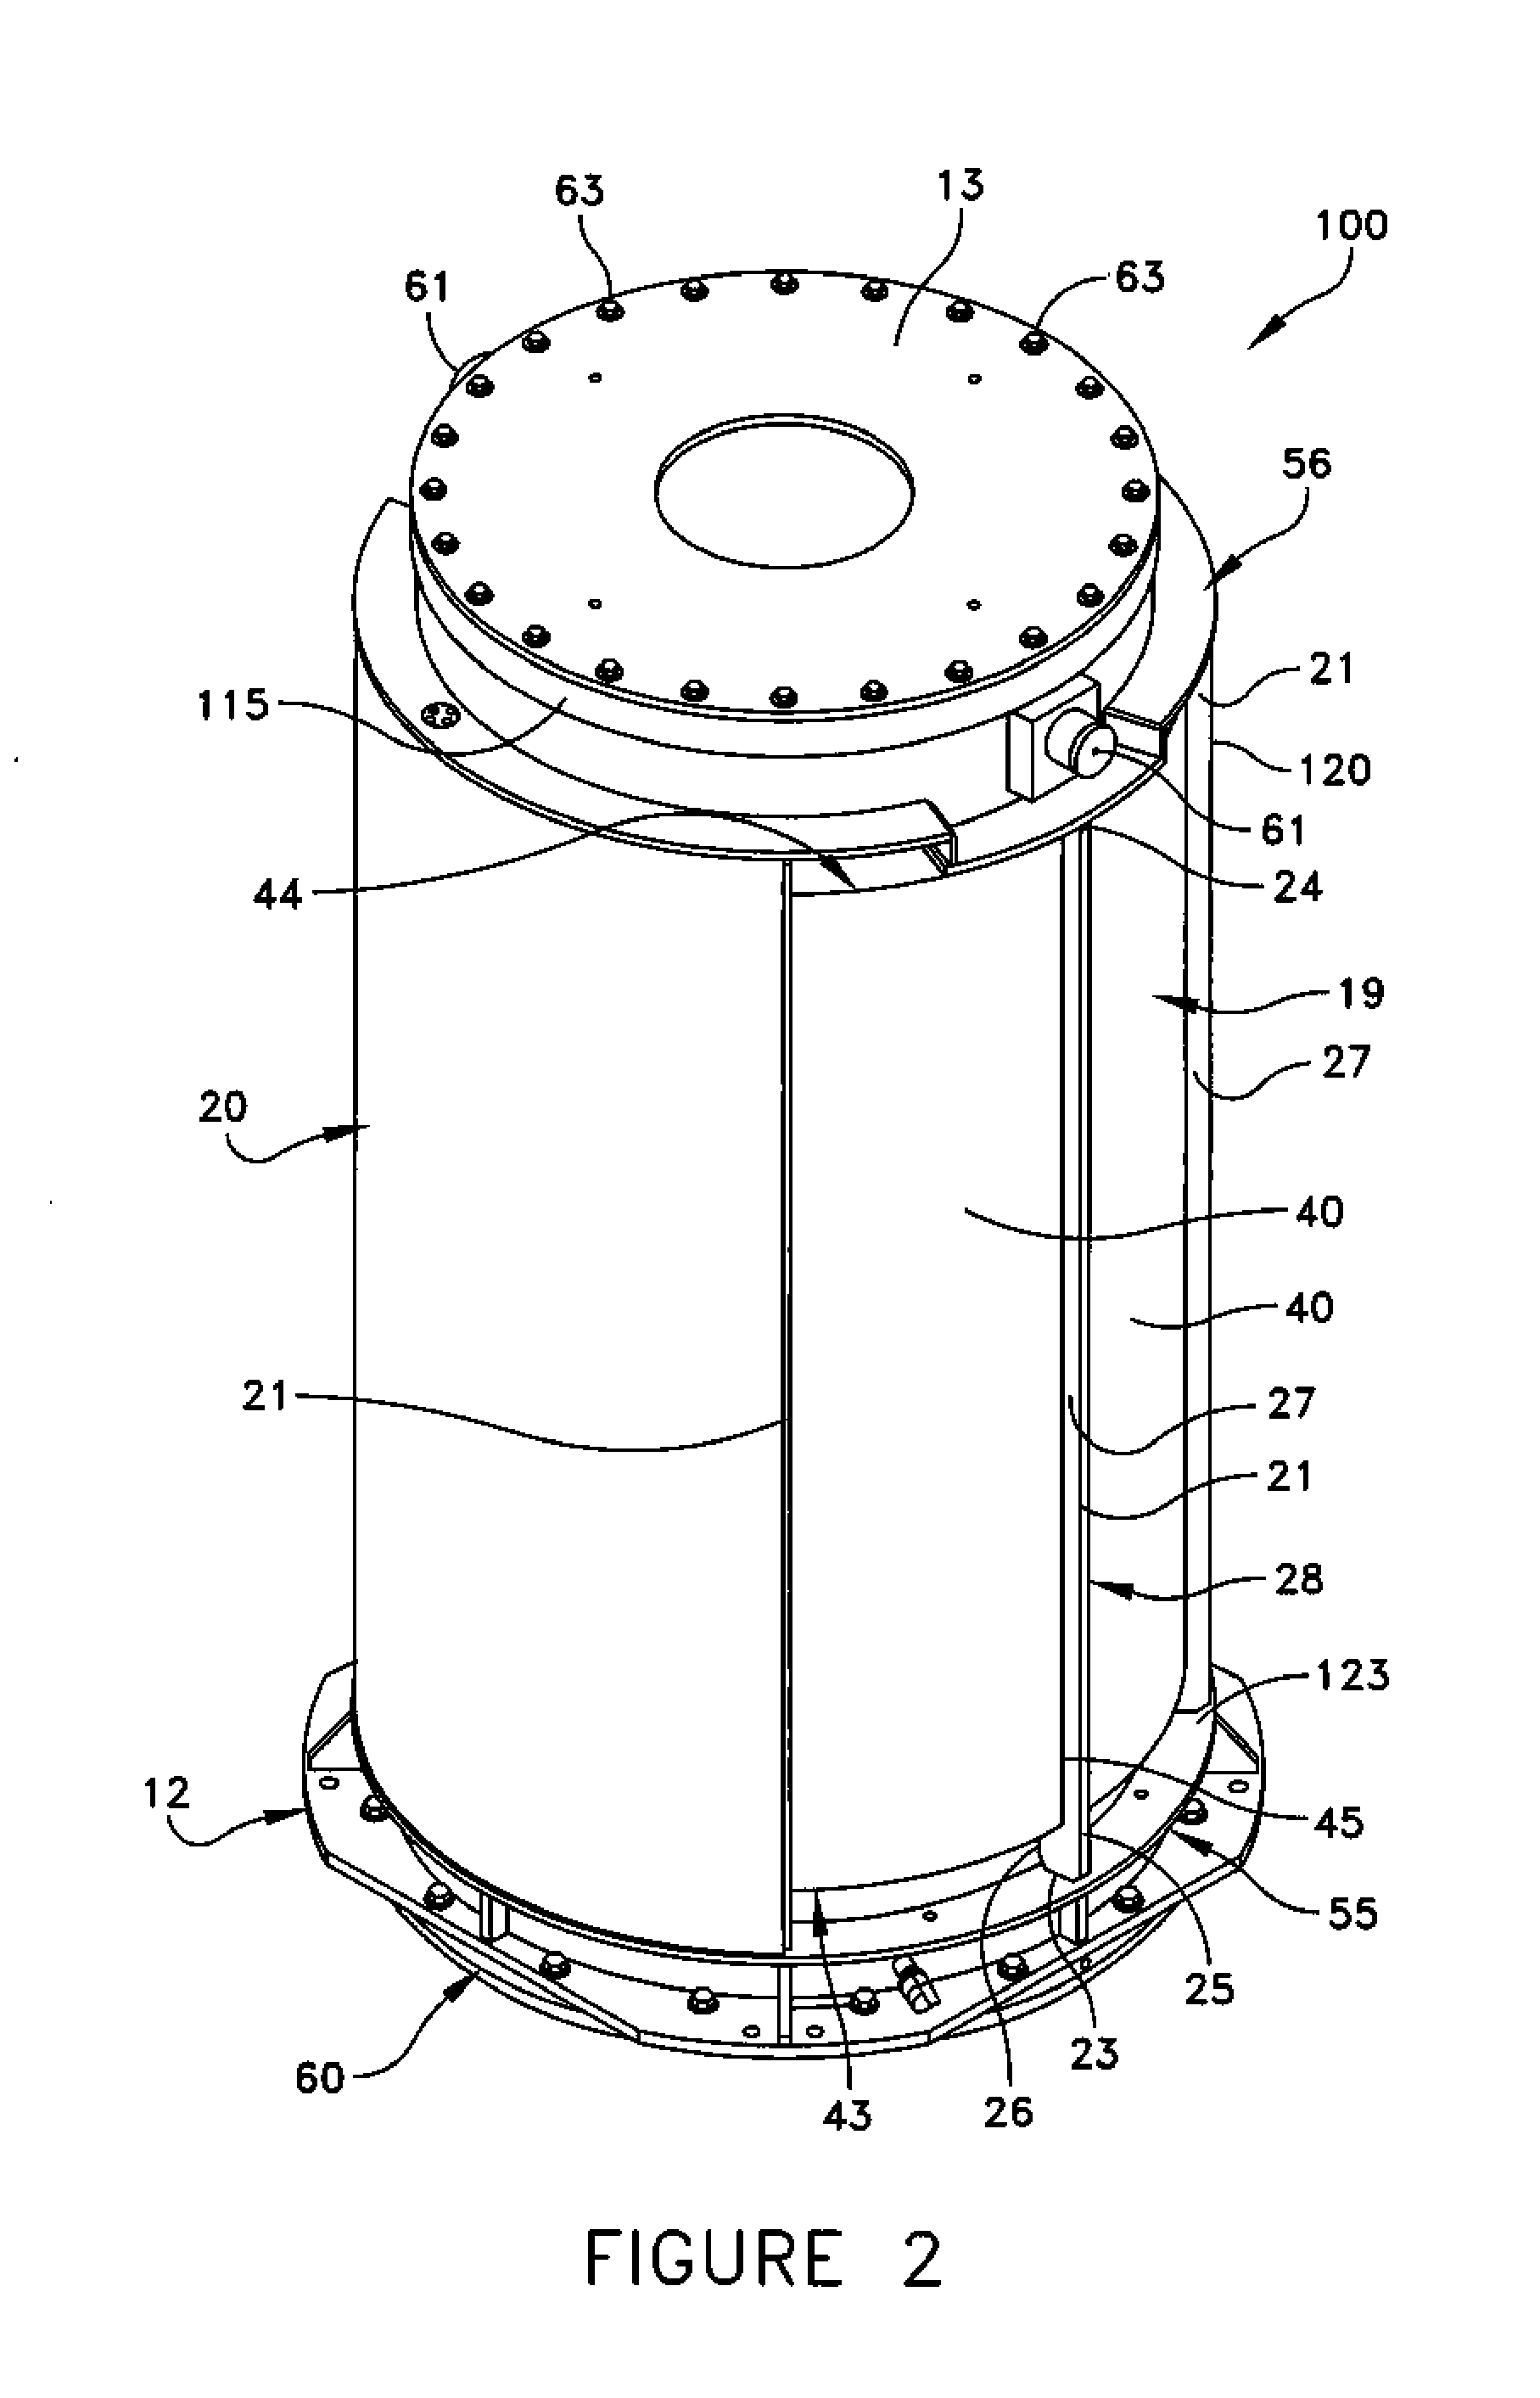 Apparatus for providing additional radiation shielding to a container holding radioactive materials, and method of using the same to handle and/or process radioactive materials